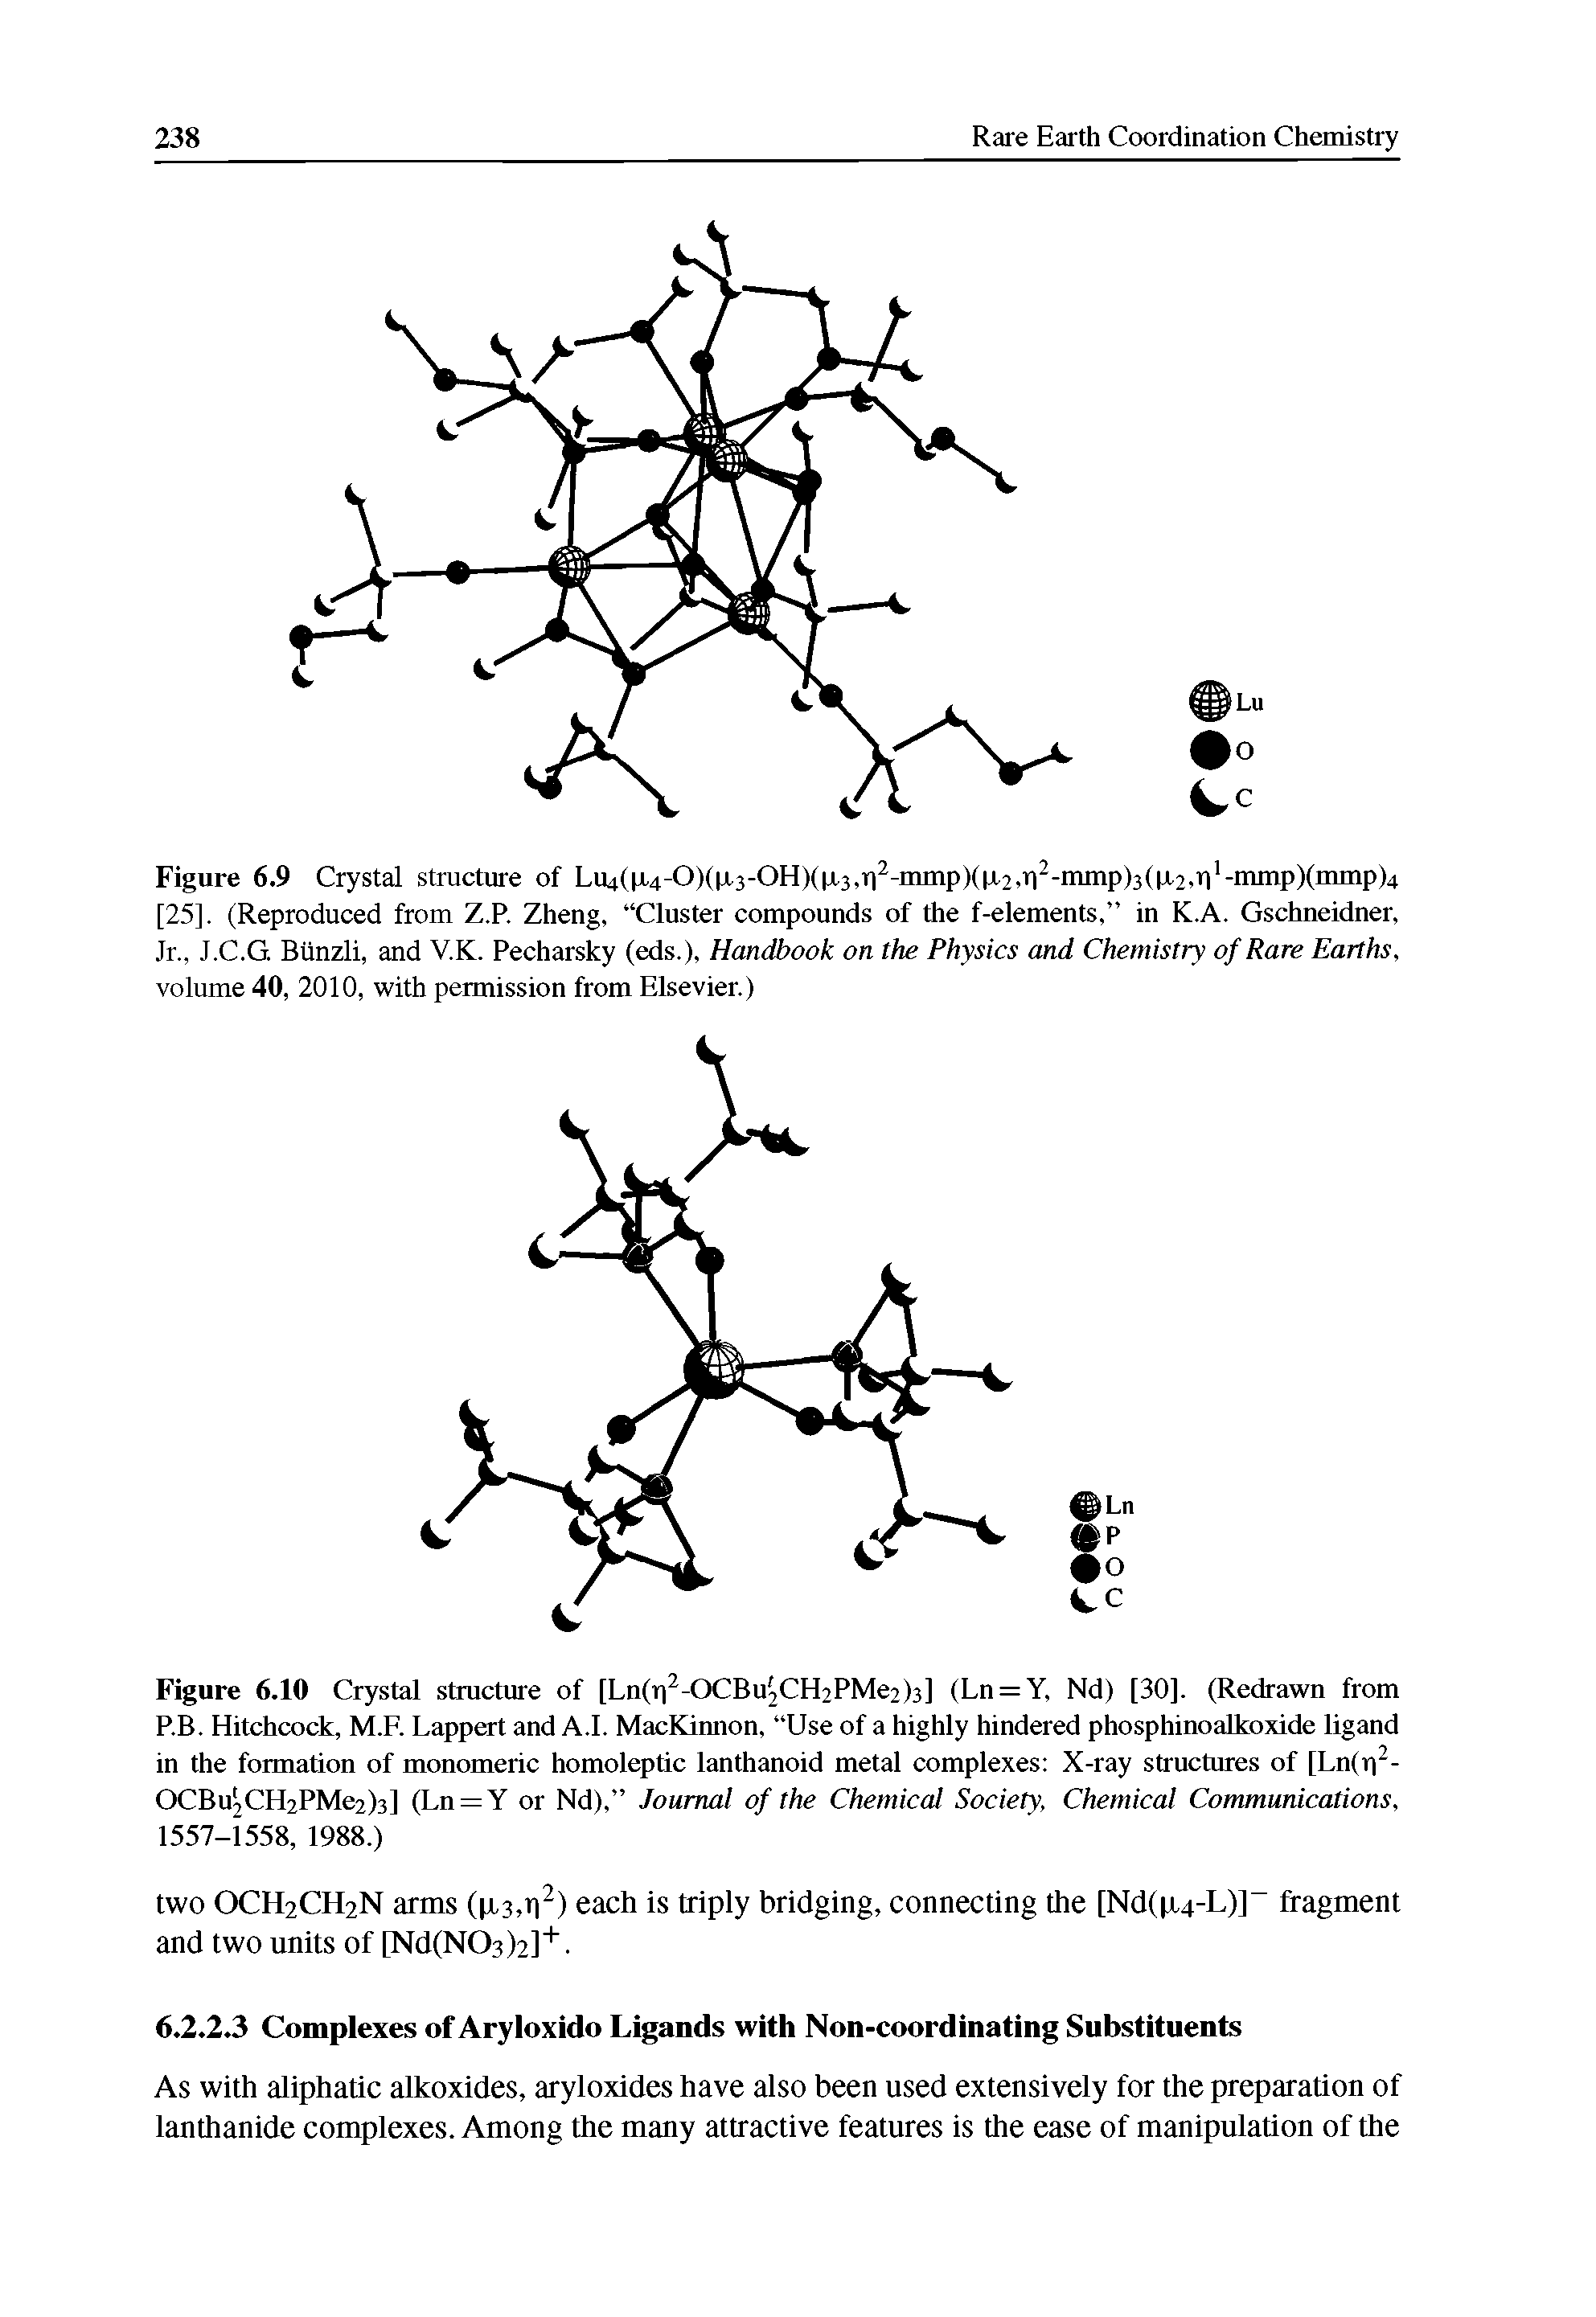 Figure 6.10 Crystal structure of [Ln(r -OCBu2CH2PMe2)3] (Ln = Y, Nd) [30]. (Redrawn from P.B. Hitchcock, M.F. Lappert and A.I. MacKimion, Use of a highly hindered phosphinoafkoxide ligand in the formation of monomeric homoleptic lanthanoid metal complexes X-ray structmes of [Ln(r -OCBu2CH2PMe2)3] (Ln = Y or Nd), Journal of the Chemical Society, Chemical Communications, 1557-1558, 1988.)...